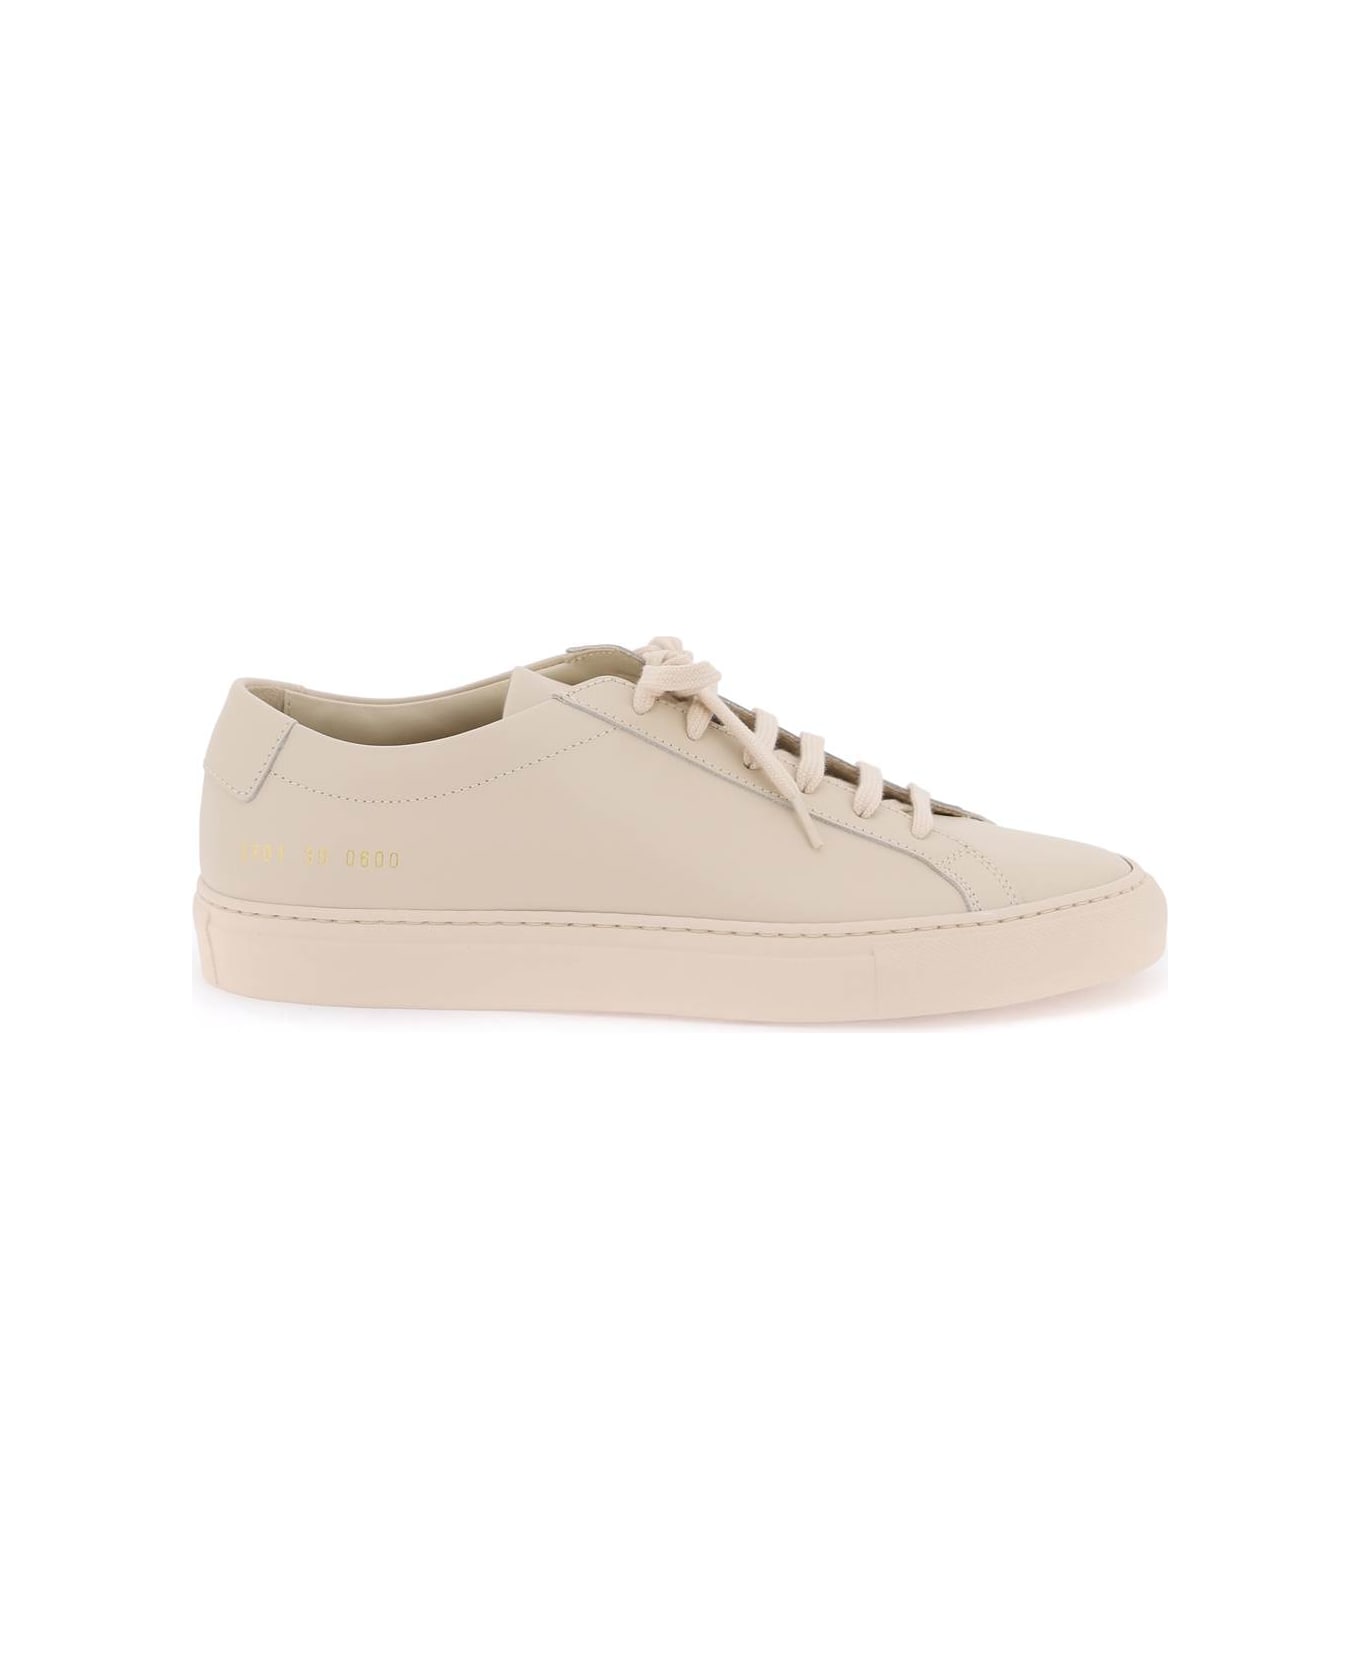 Common Projects Original Achilles Leather Sneakers - Nude